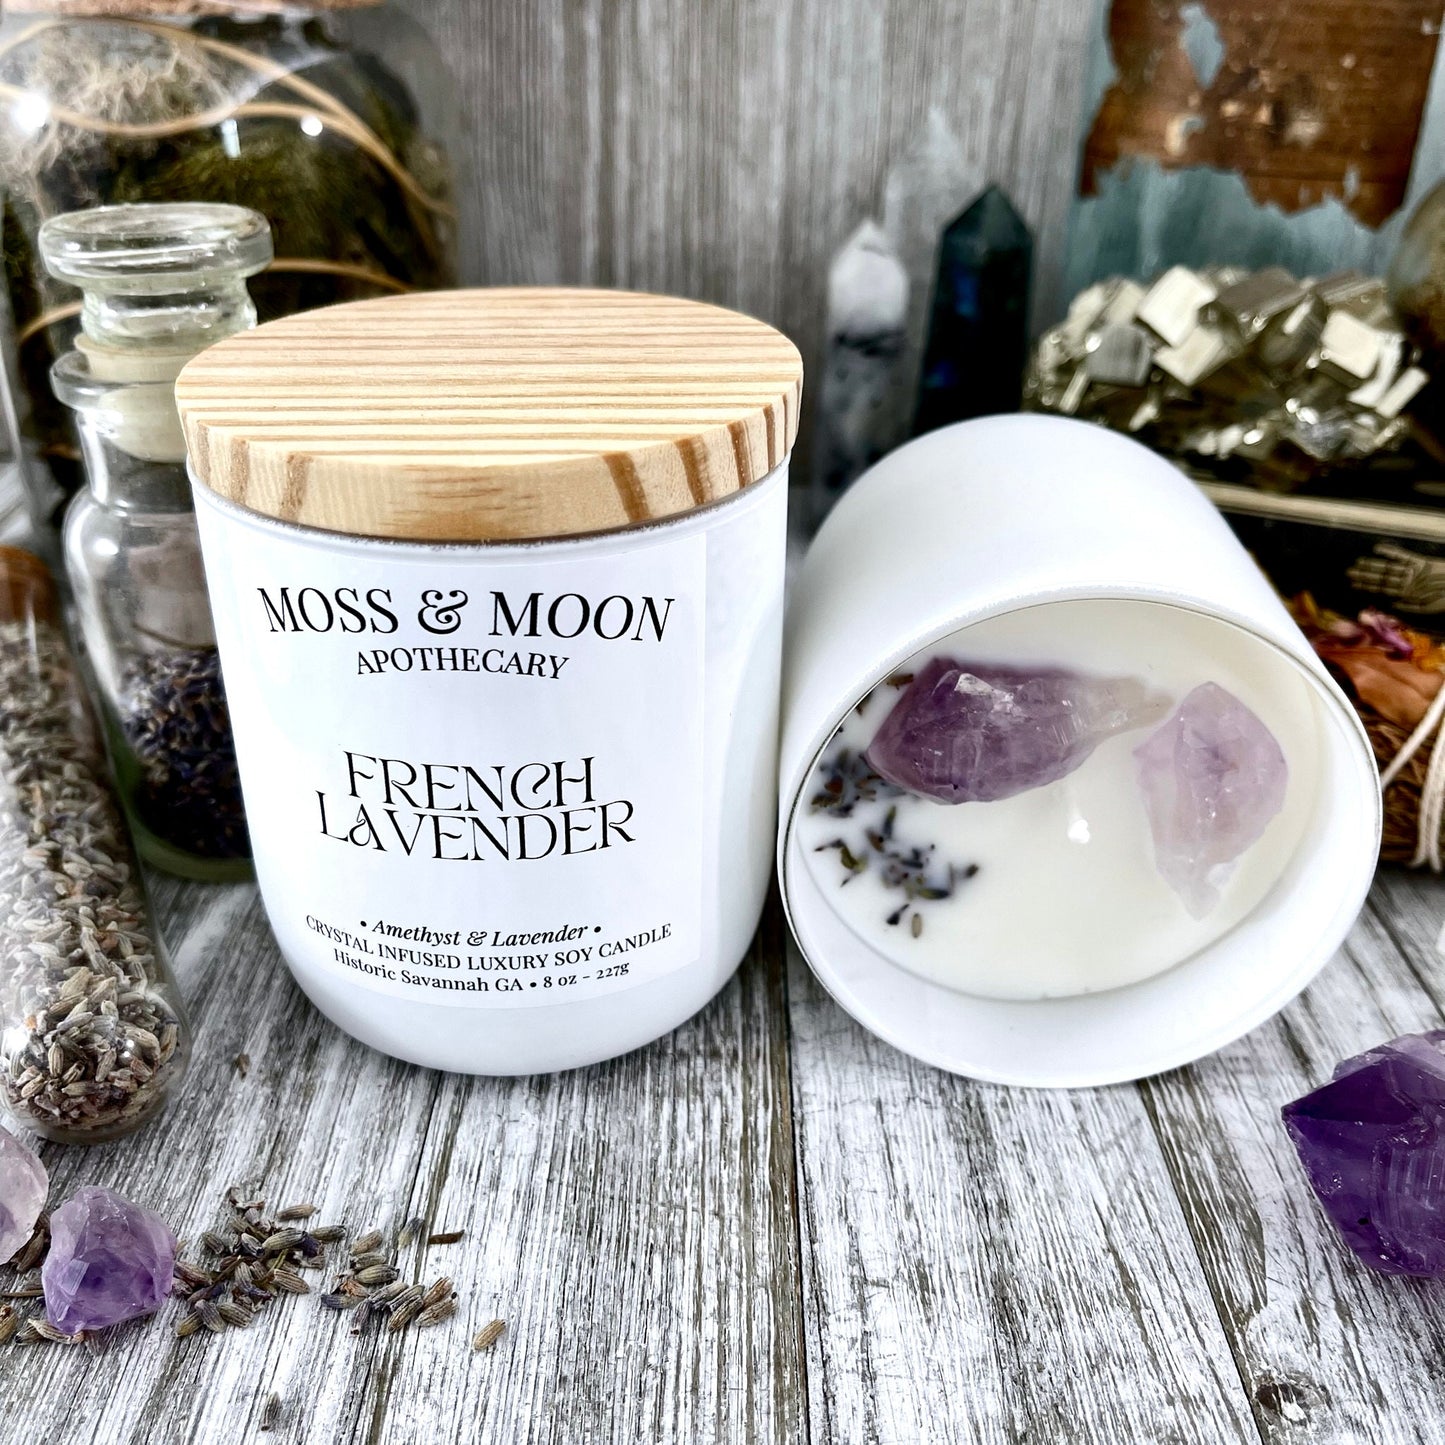 French Lavender Candle with Raw Amethyst and Lavender - Moss & Moon Apothecary Luxury Soy Crystal Candle